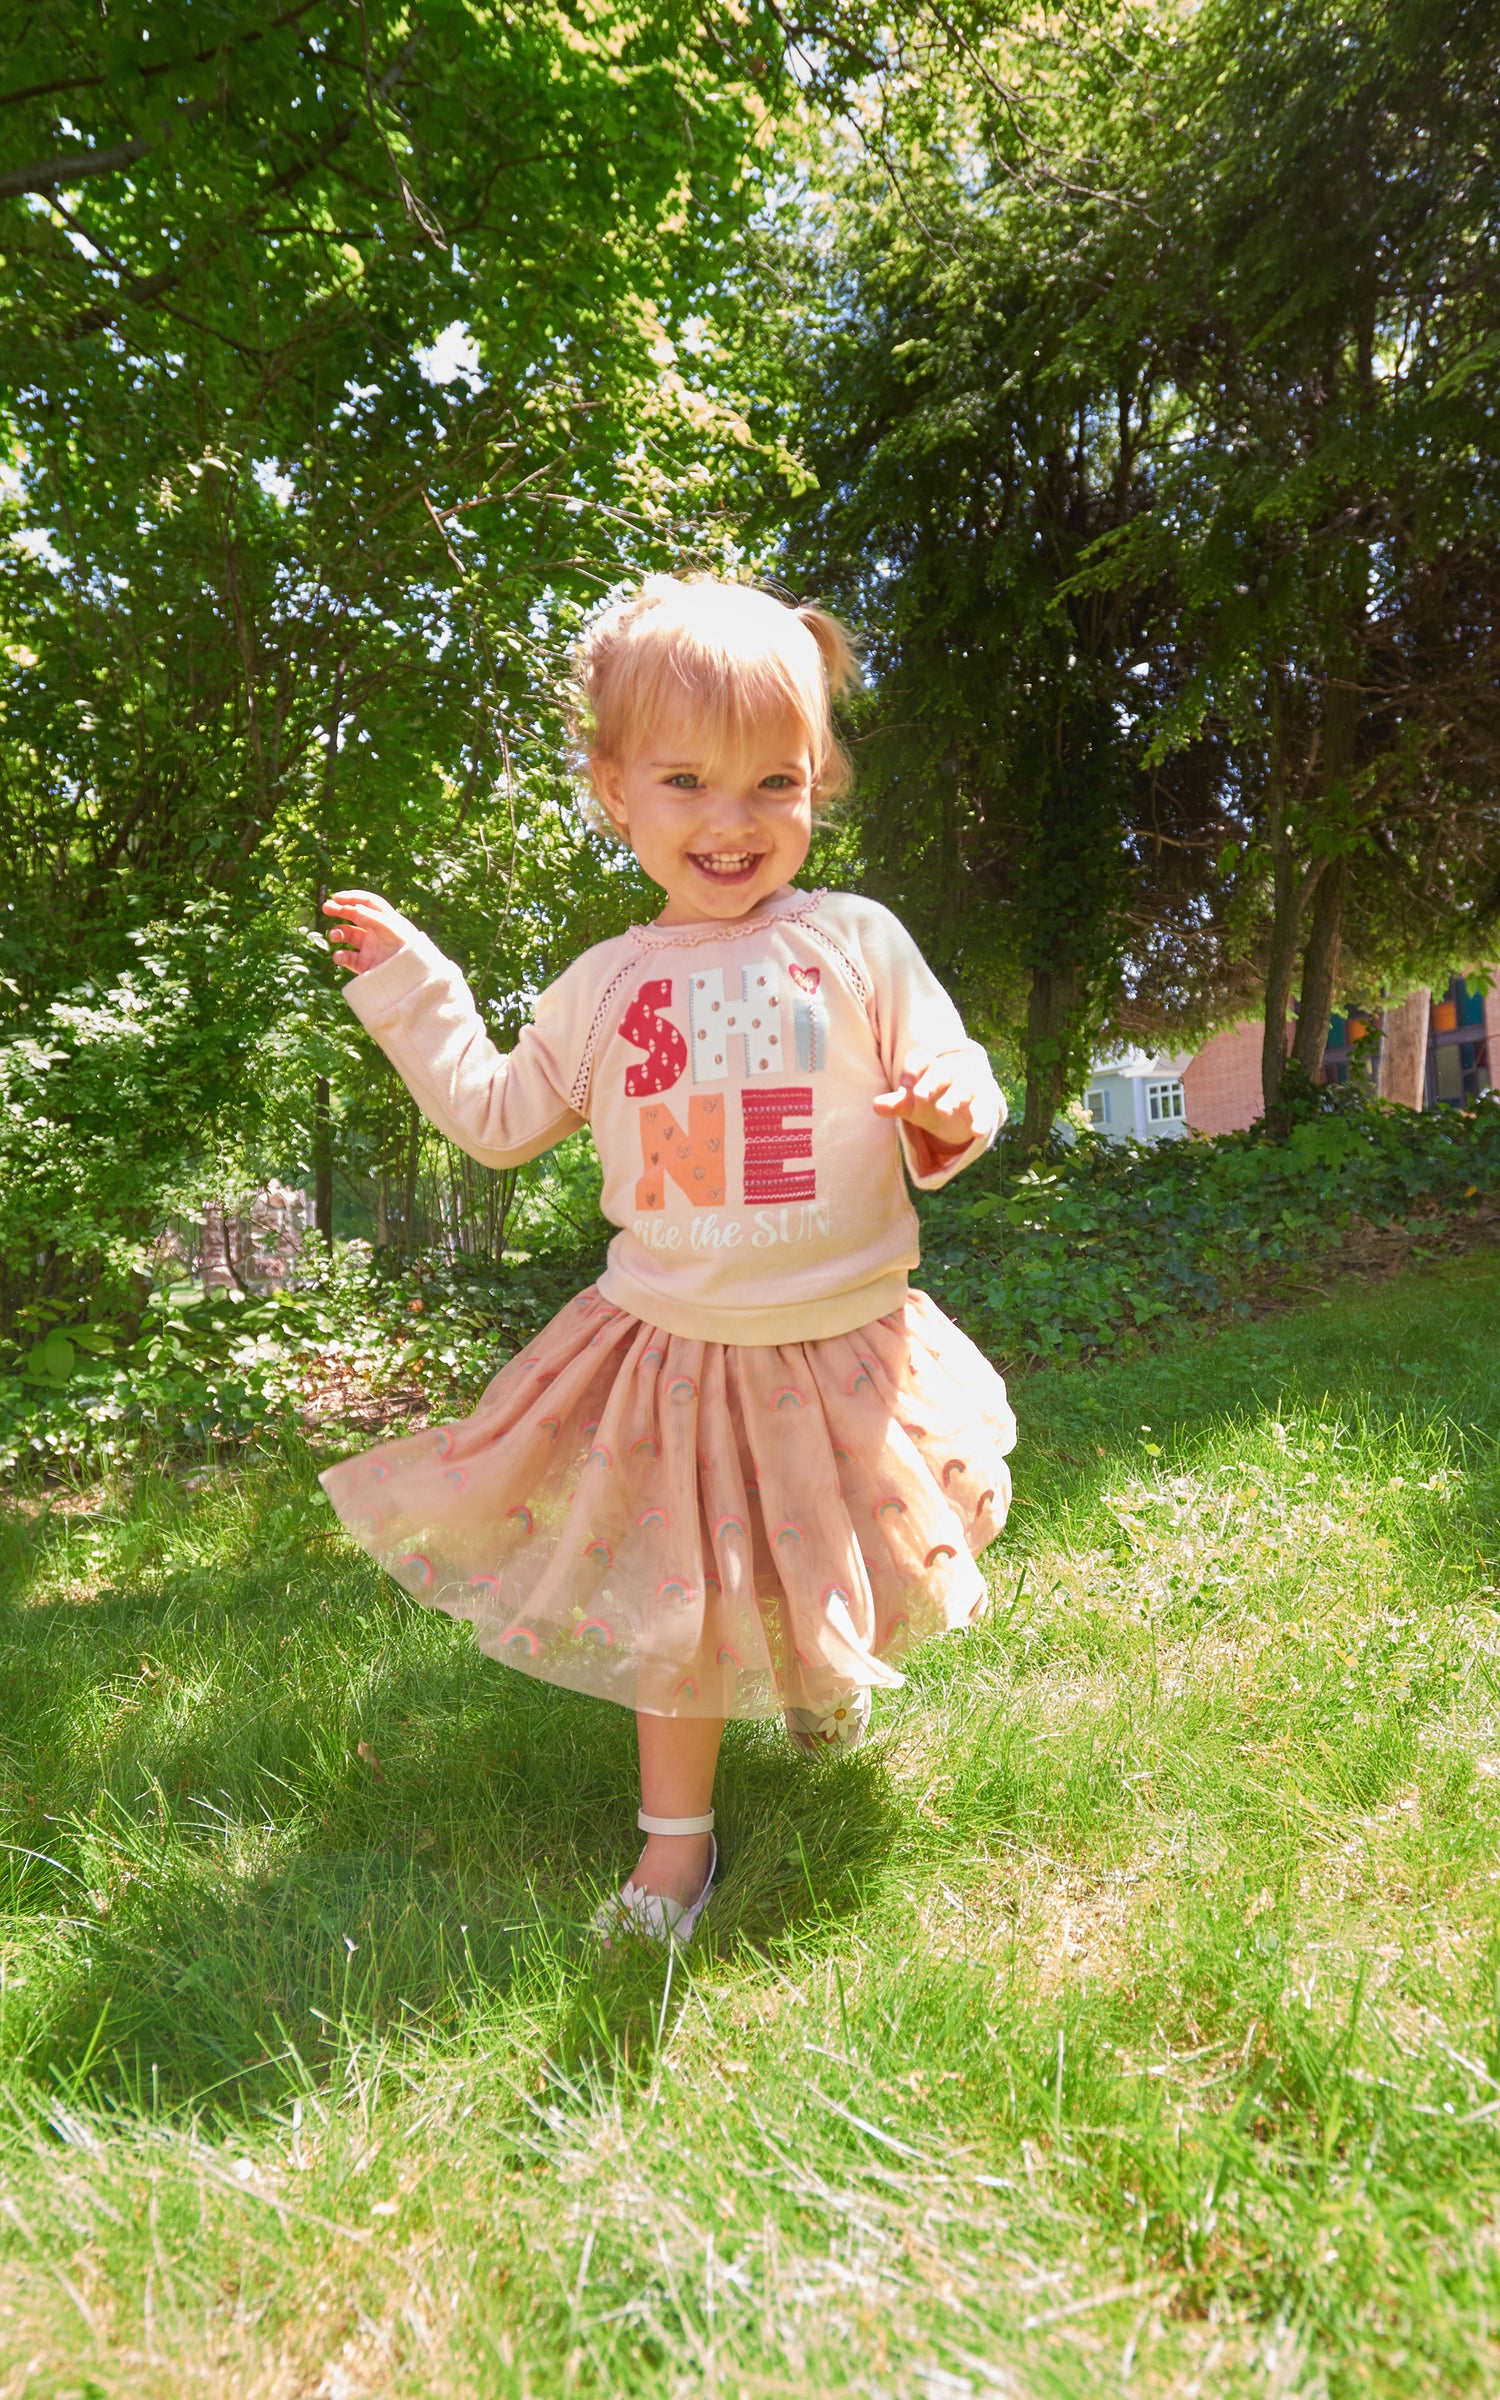 Front view of child running outside with pink sweatshirt and tulle skirt set with "shine like the sun" wording  